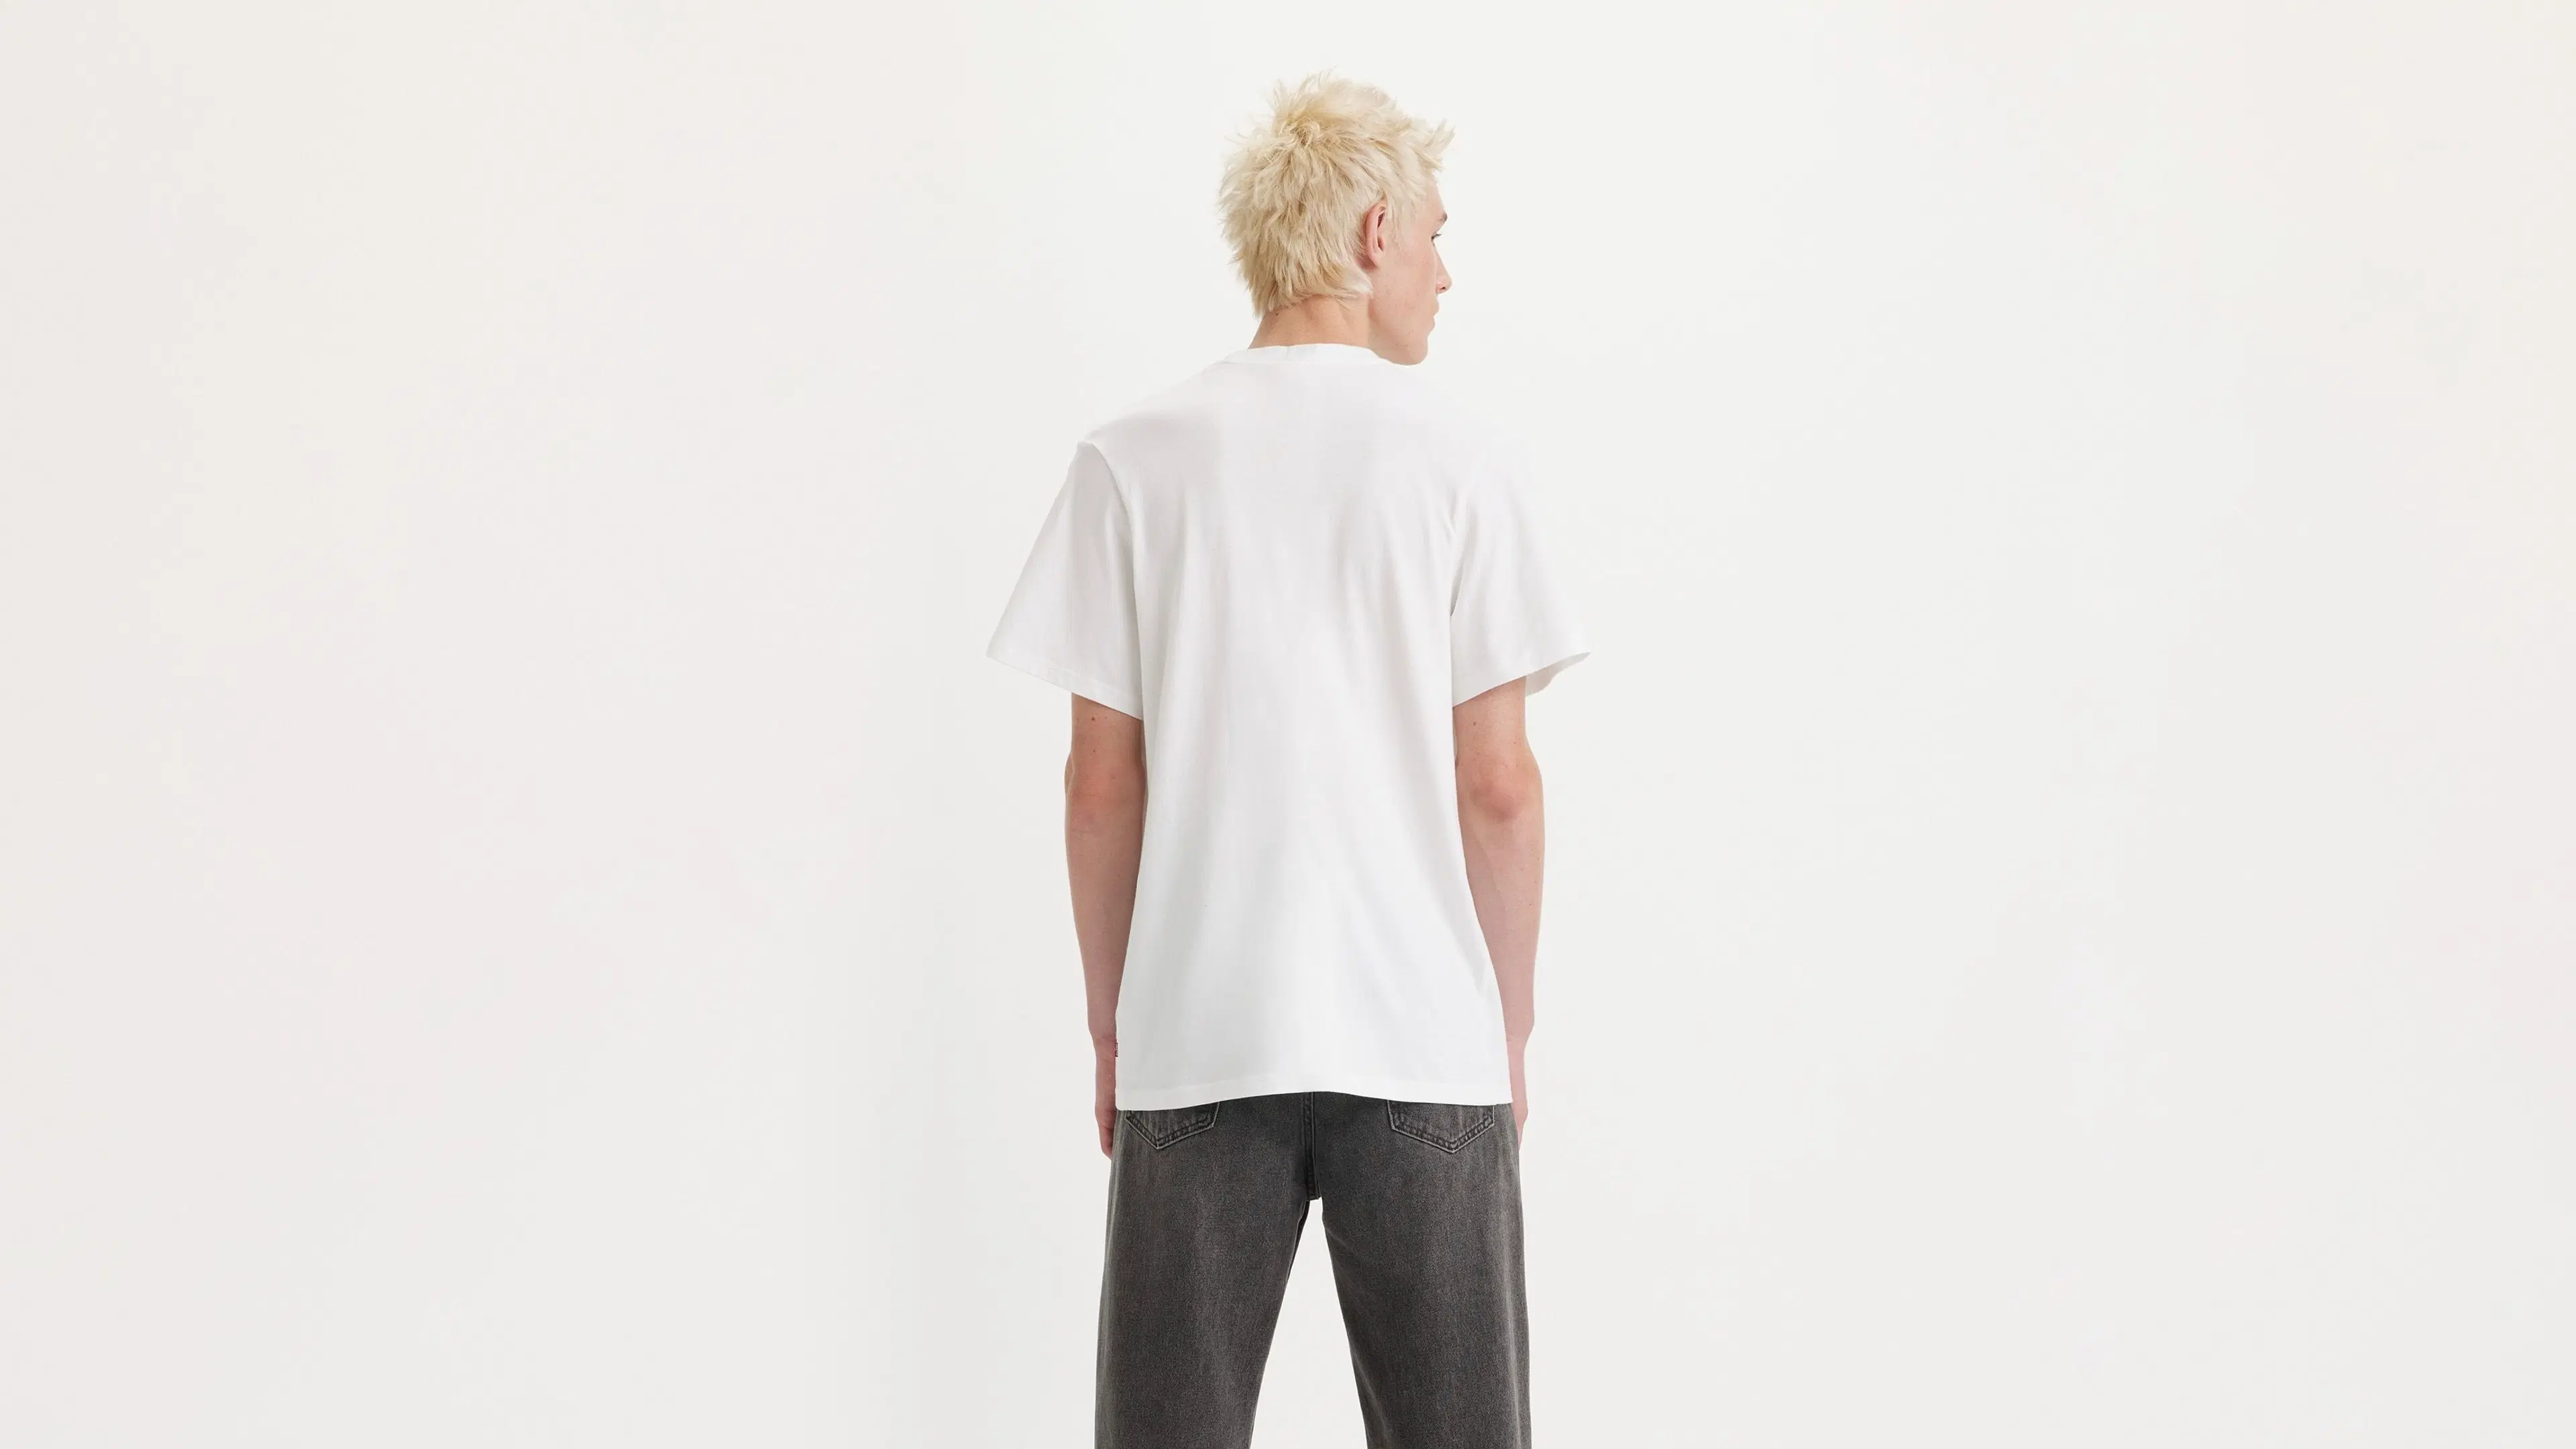 Levi's relaxed fit t-paita